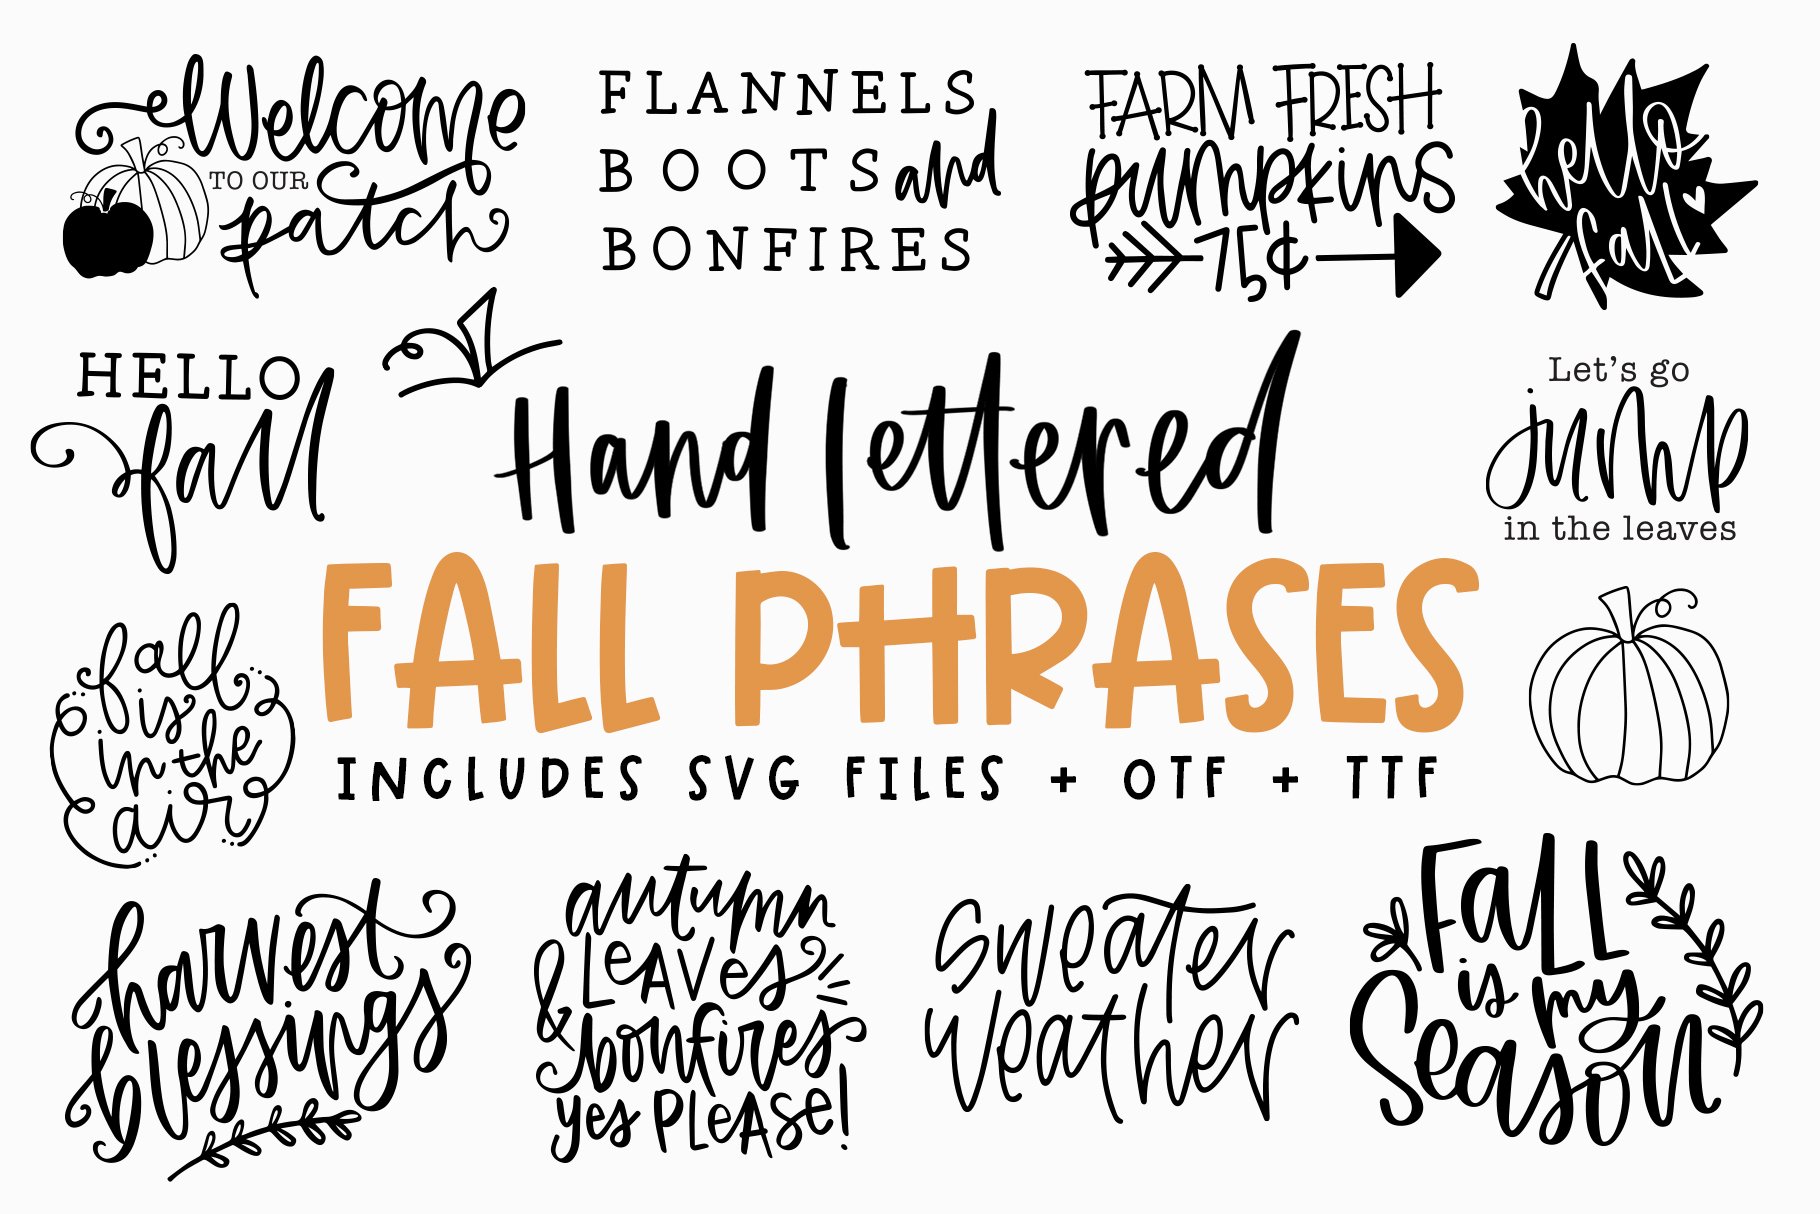 Fall Phrases Symbol Font Volume 2 cover image.